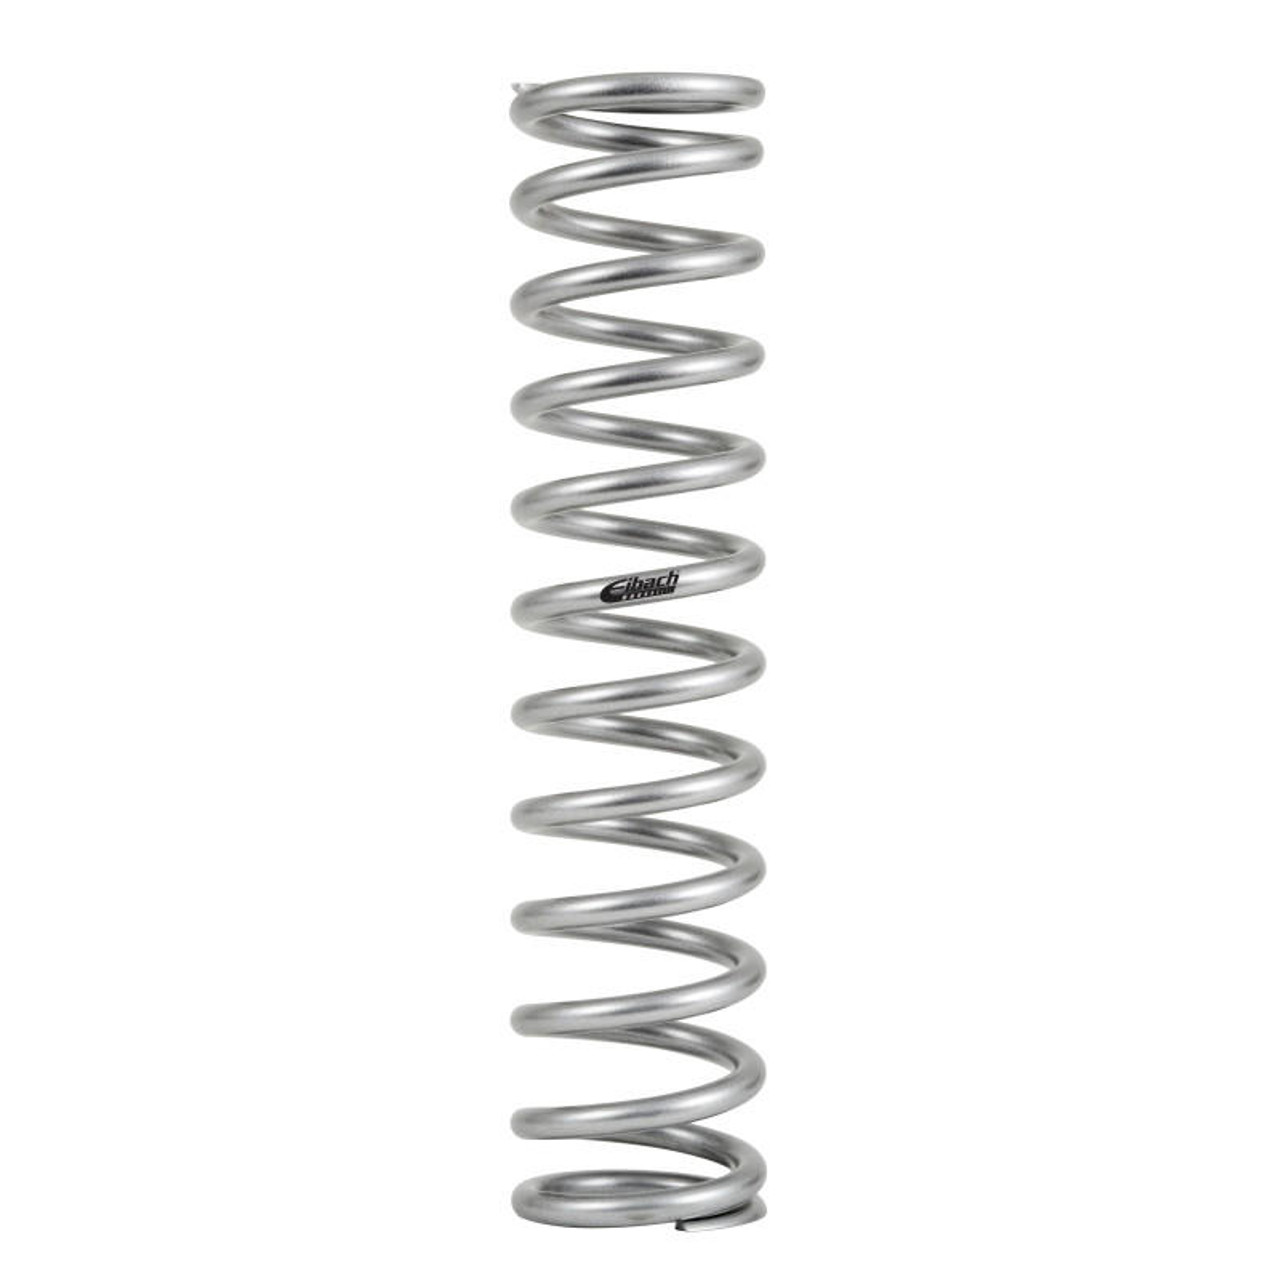  Eibach ERS 18.00 in. Length x 3.00 in. ID Coil-Over Spring - 1800.300.0700S 